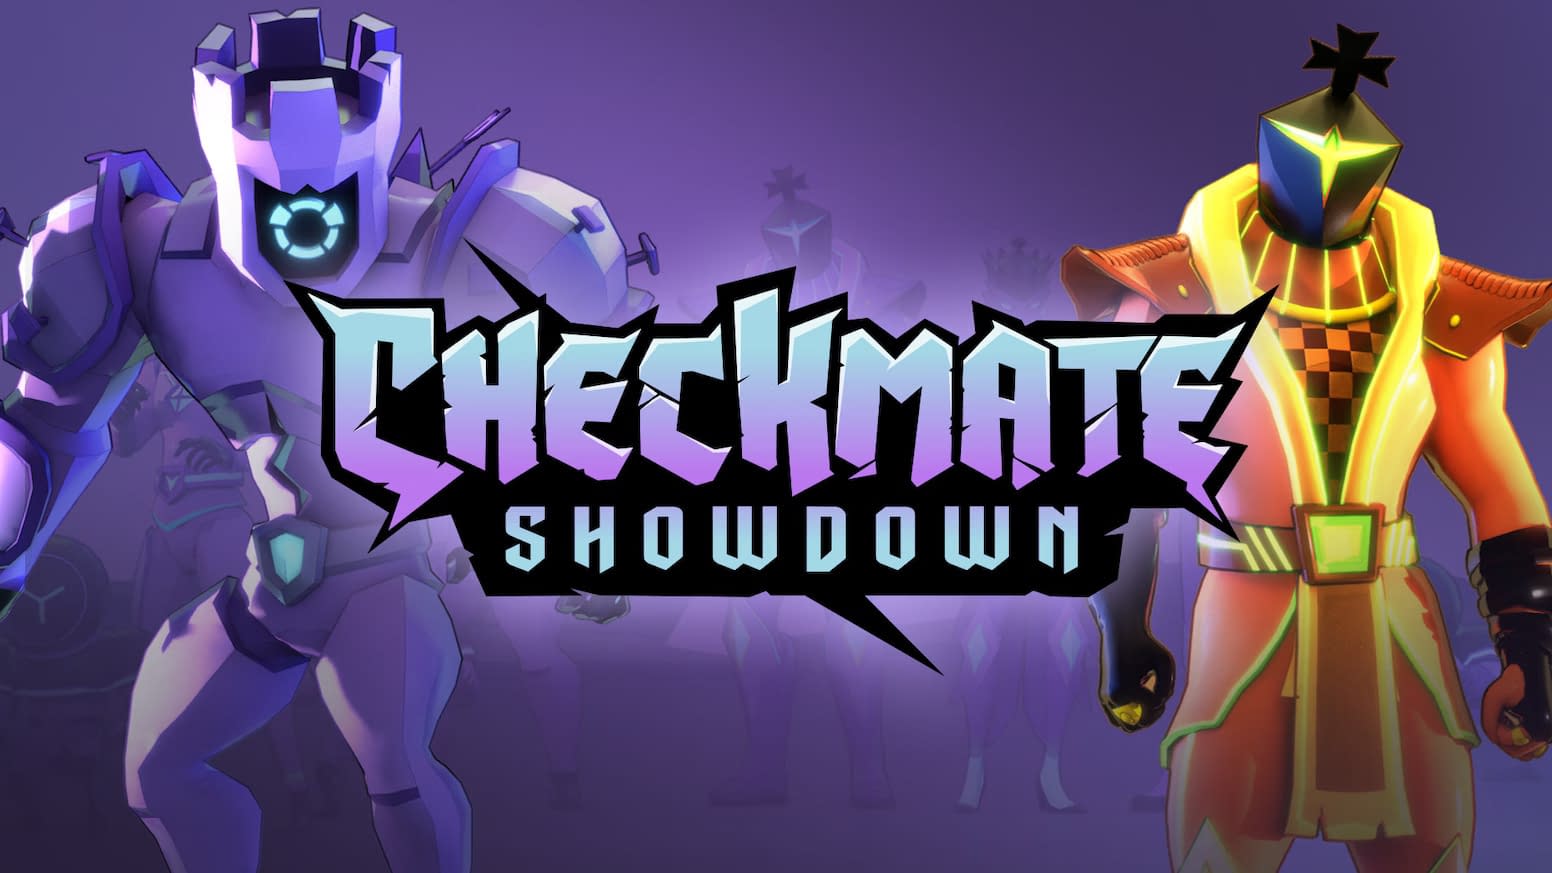 Watch Checkmate Streaming Online